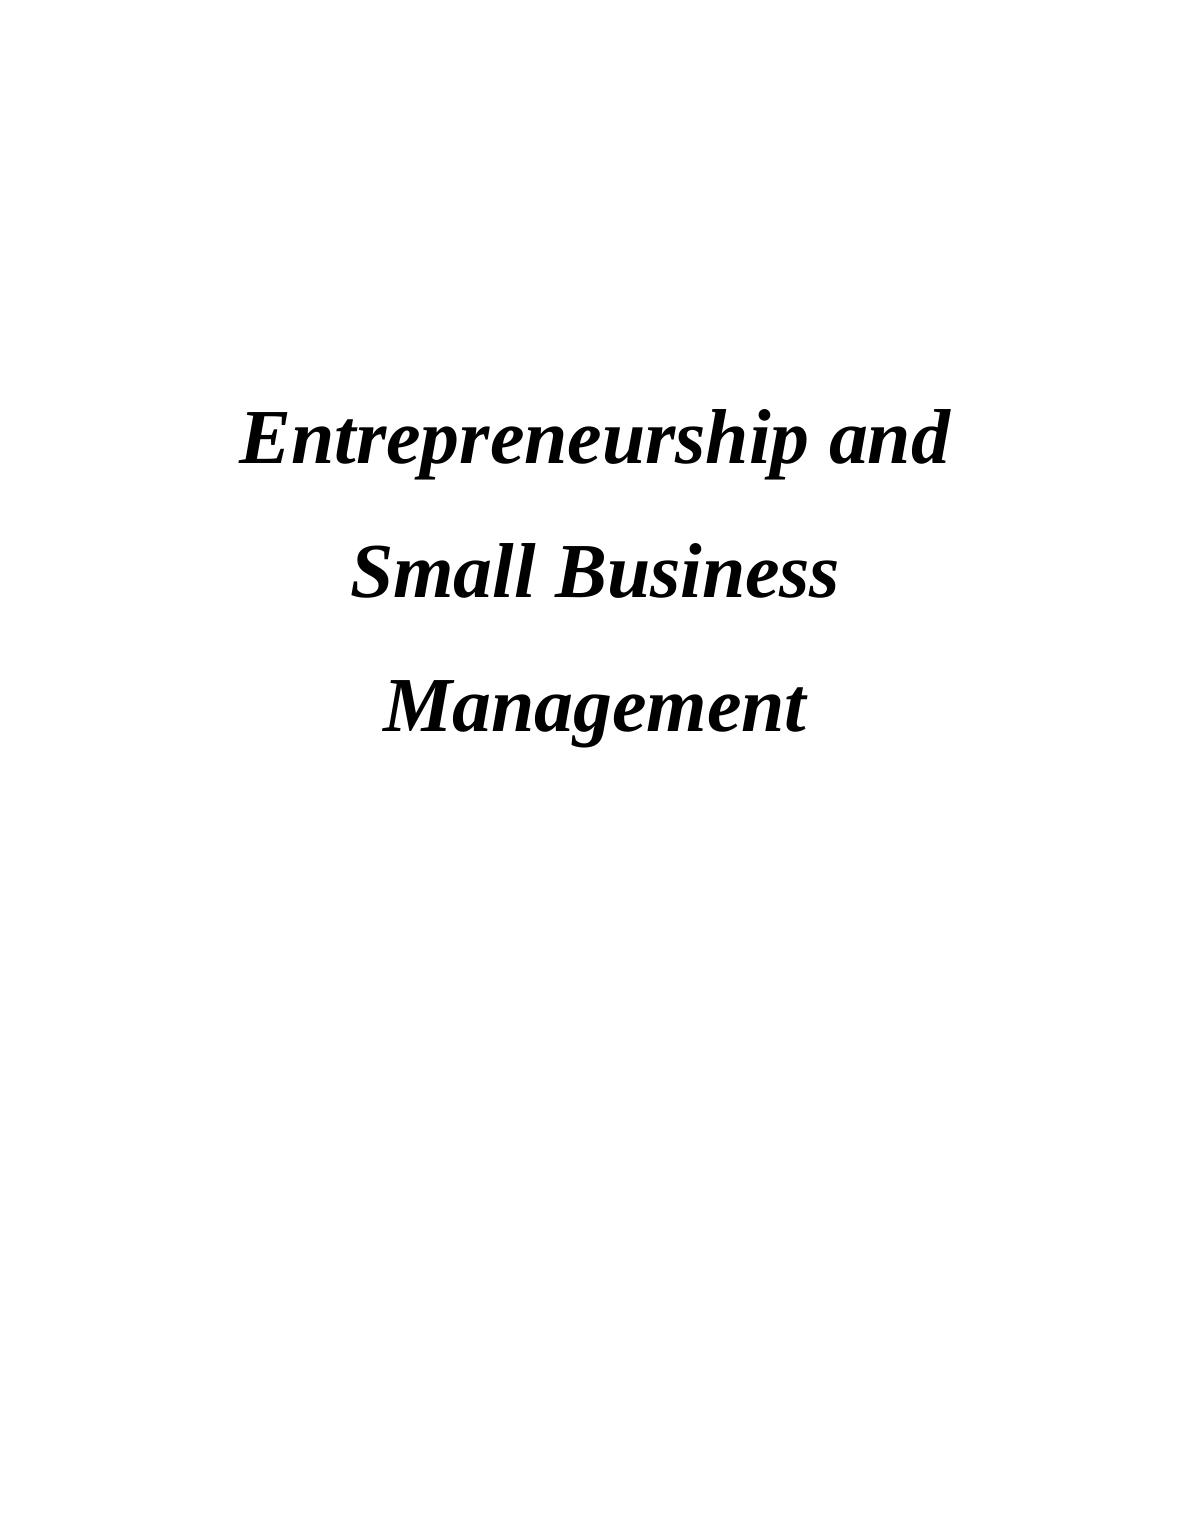 Impact of Small Business and Entrepreneurship on Social Economy_1